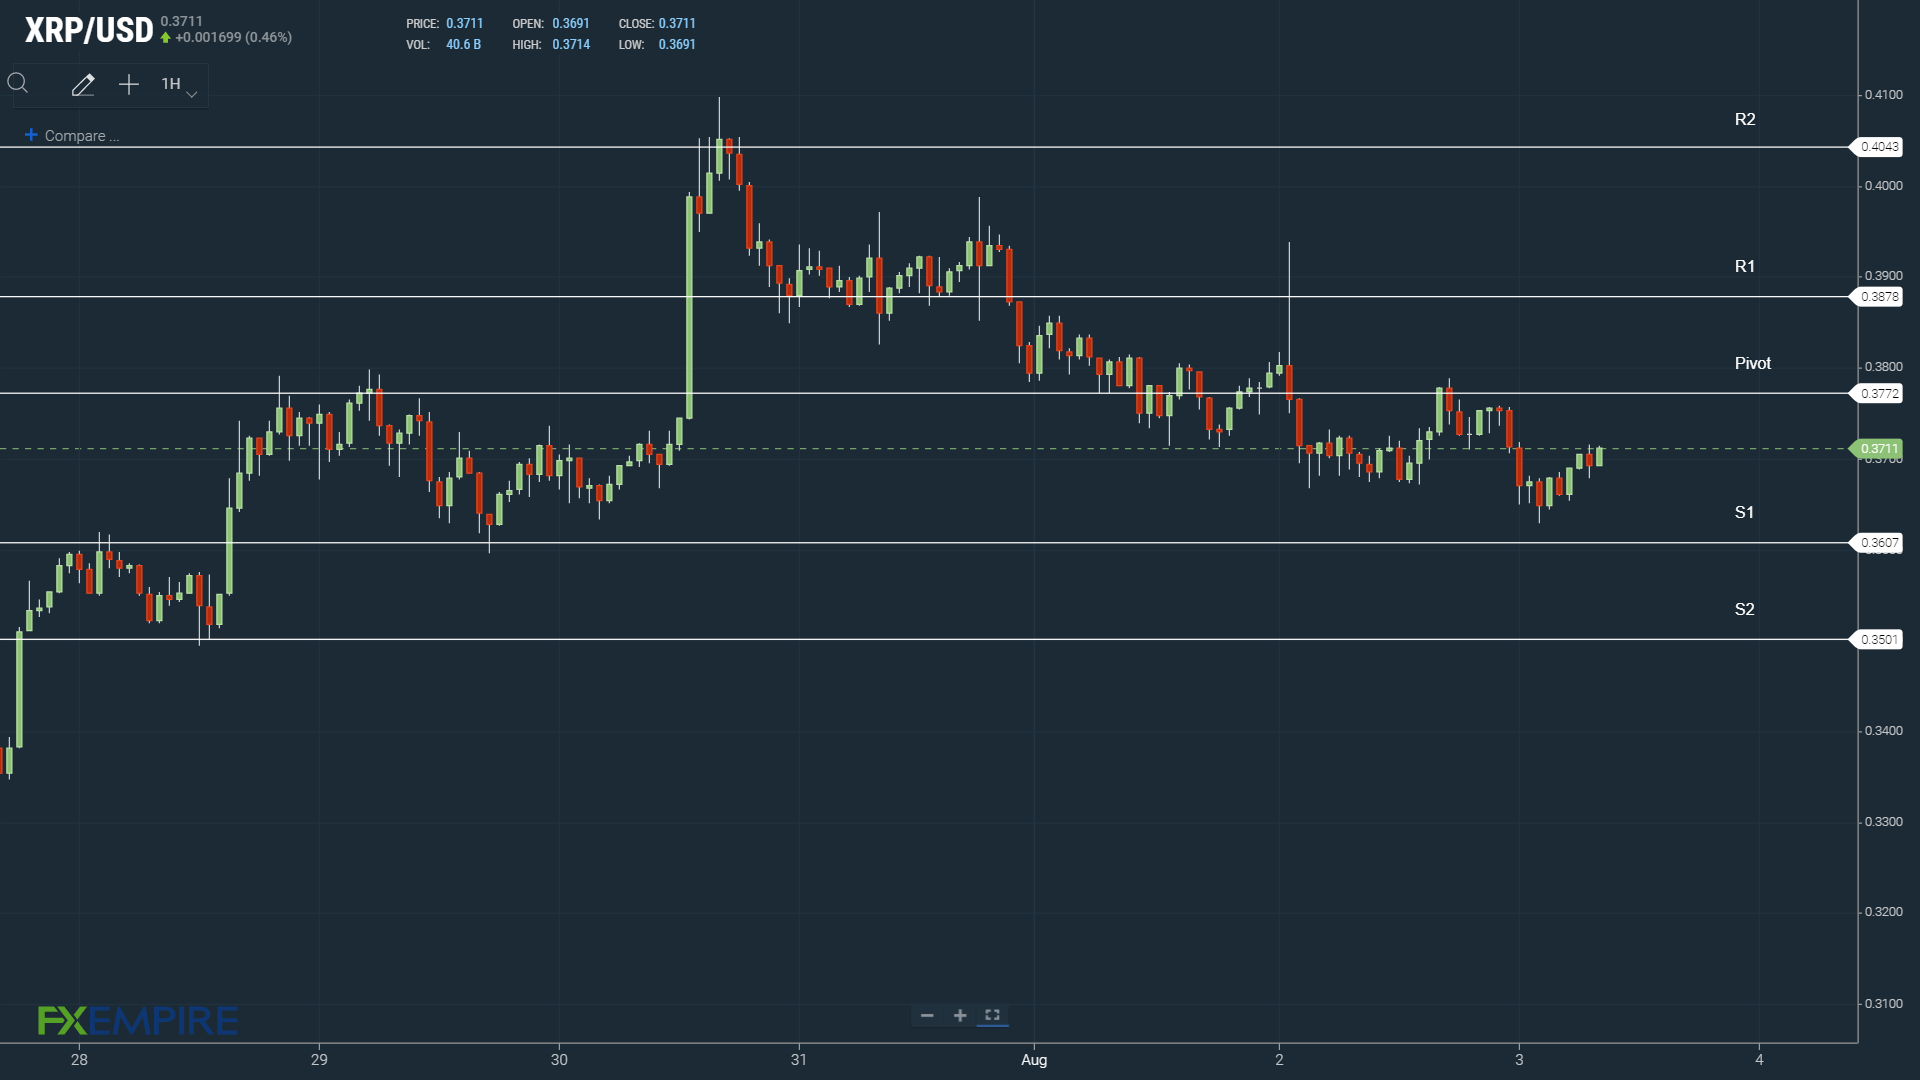 XRP support levels in play